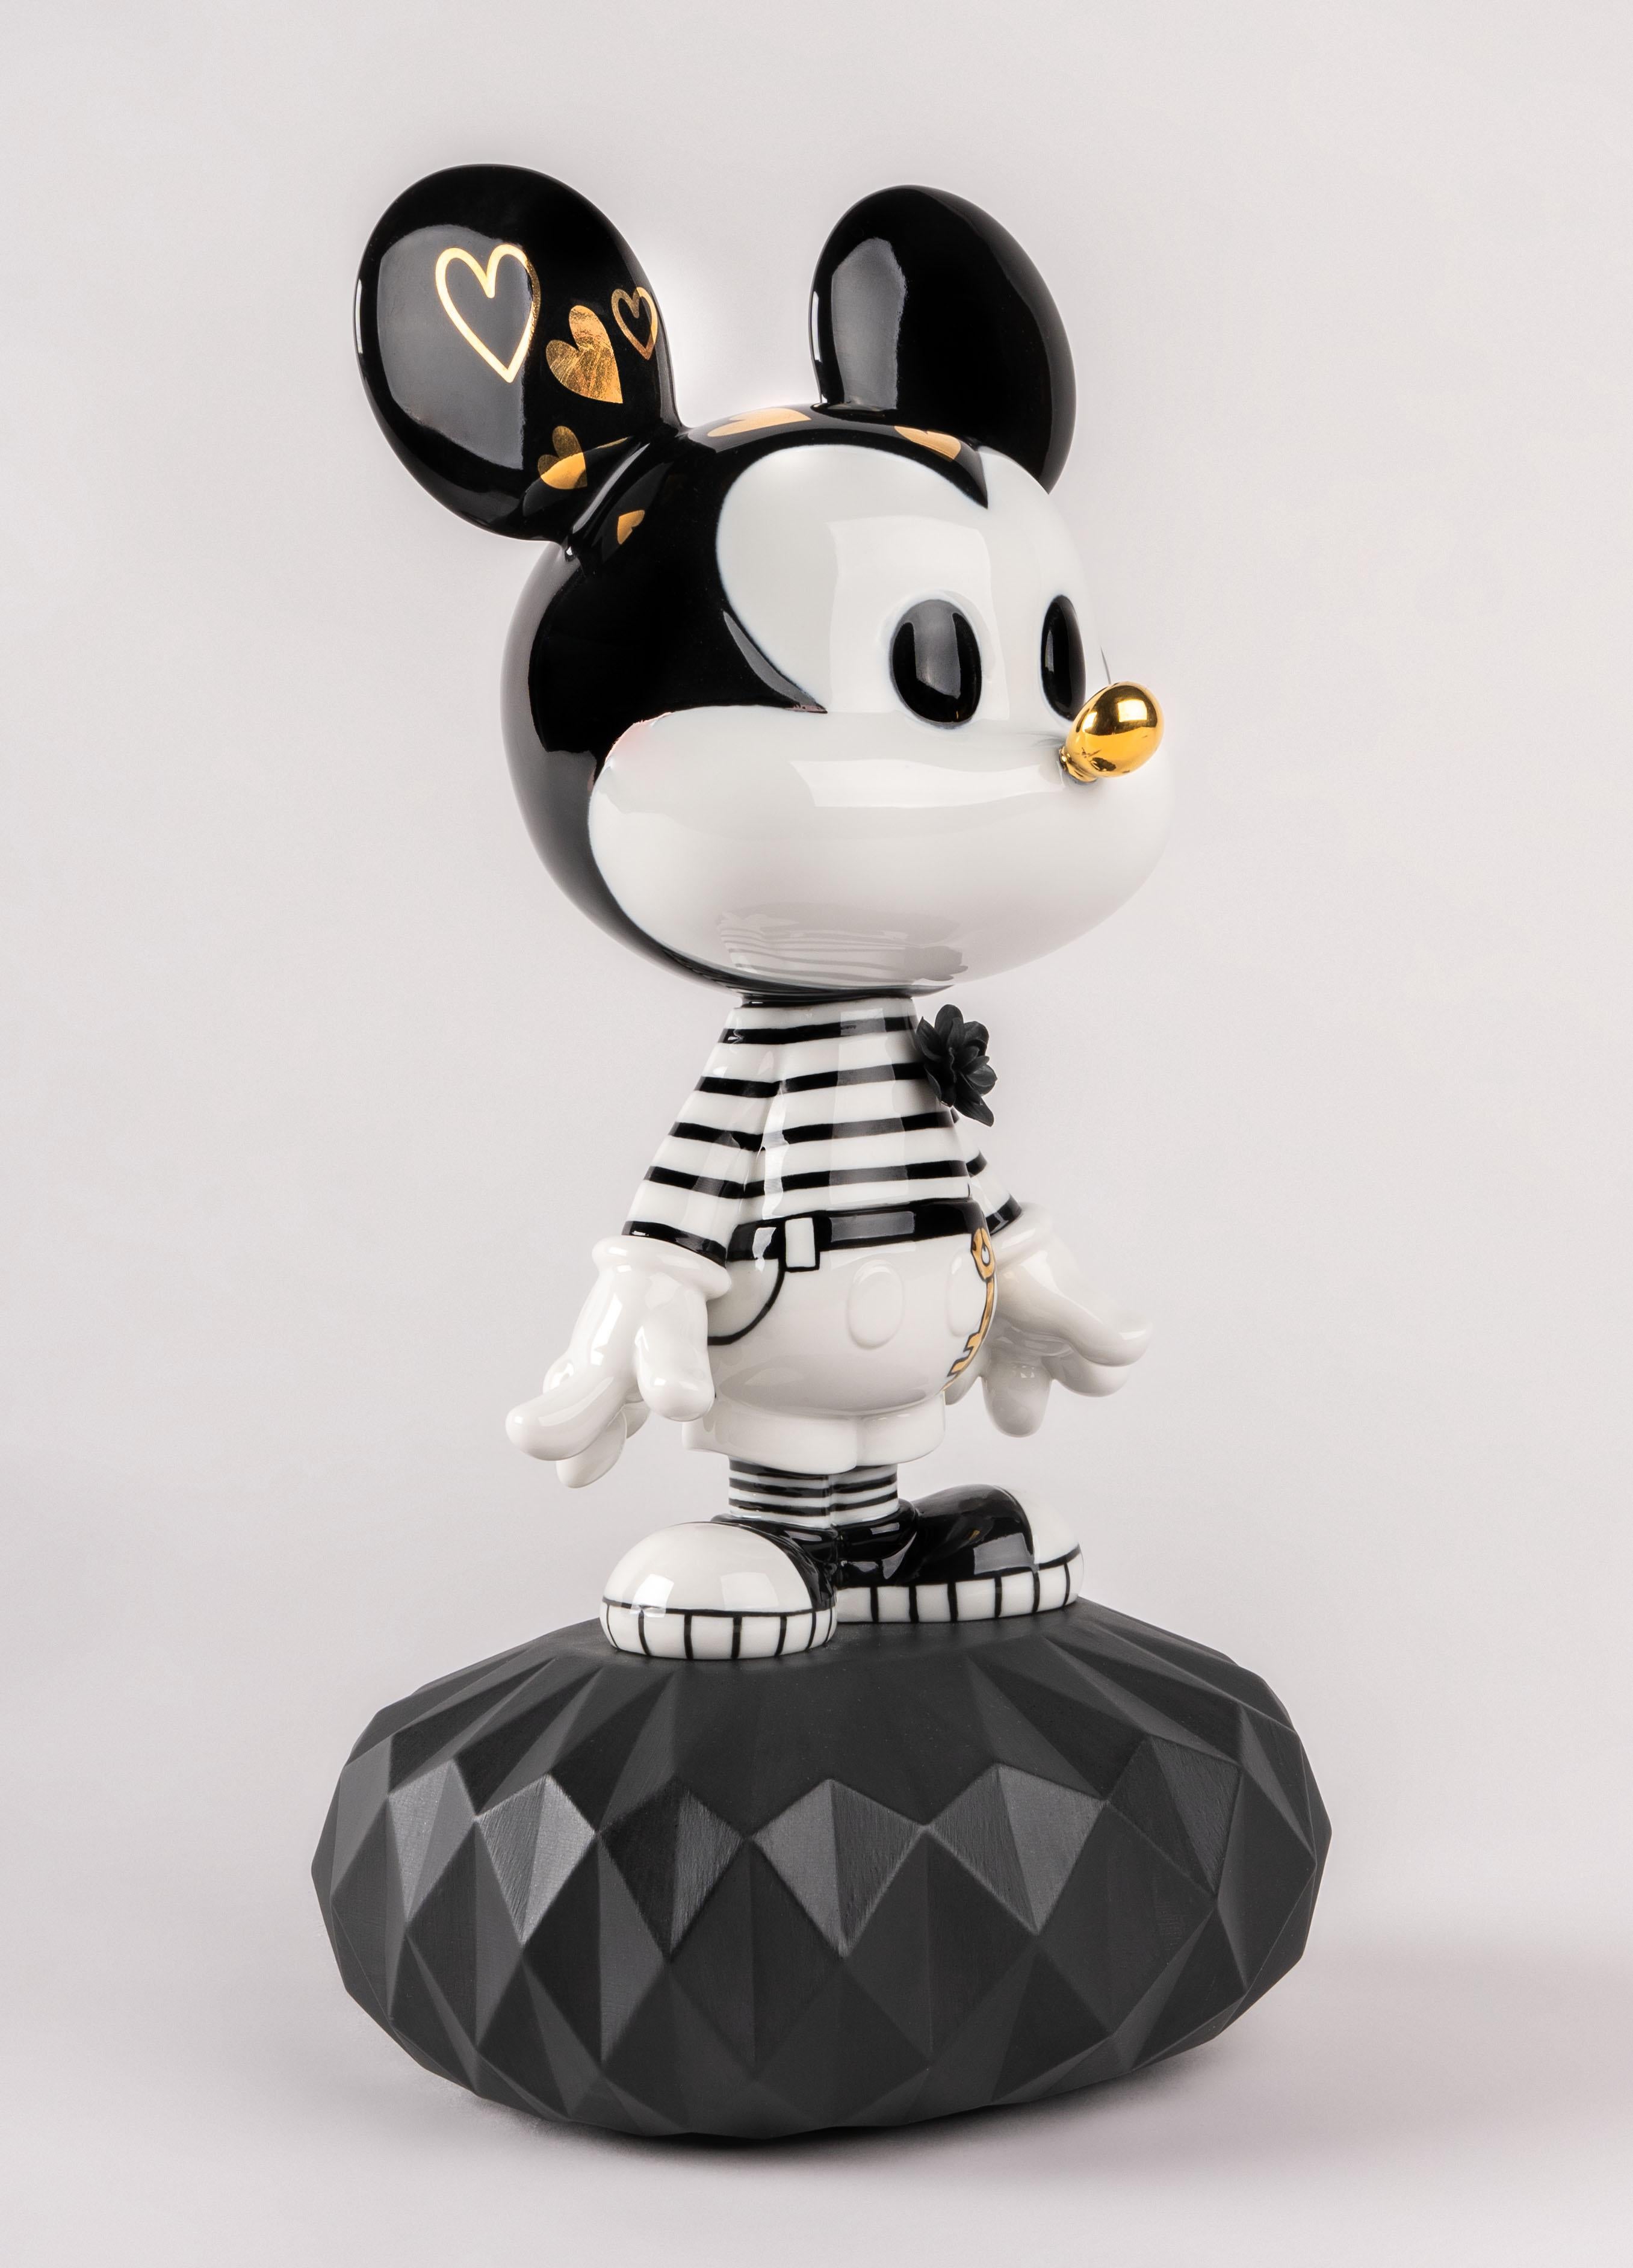 This creation is based on a contemporary vision of Mickey Mouse. The creative approach taken is based on the cartoon technique and contains black ink strokes on white. And so, Mickey is decorated with hand painted drawings on porcelain, symbolizing